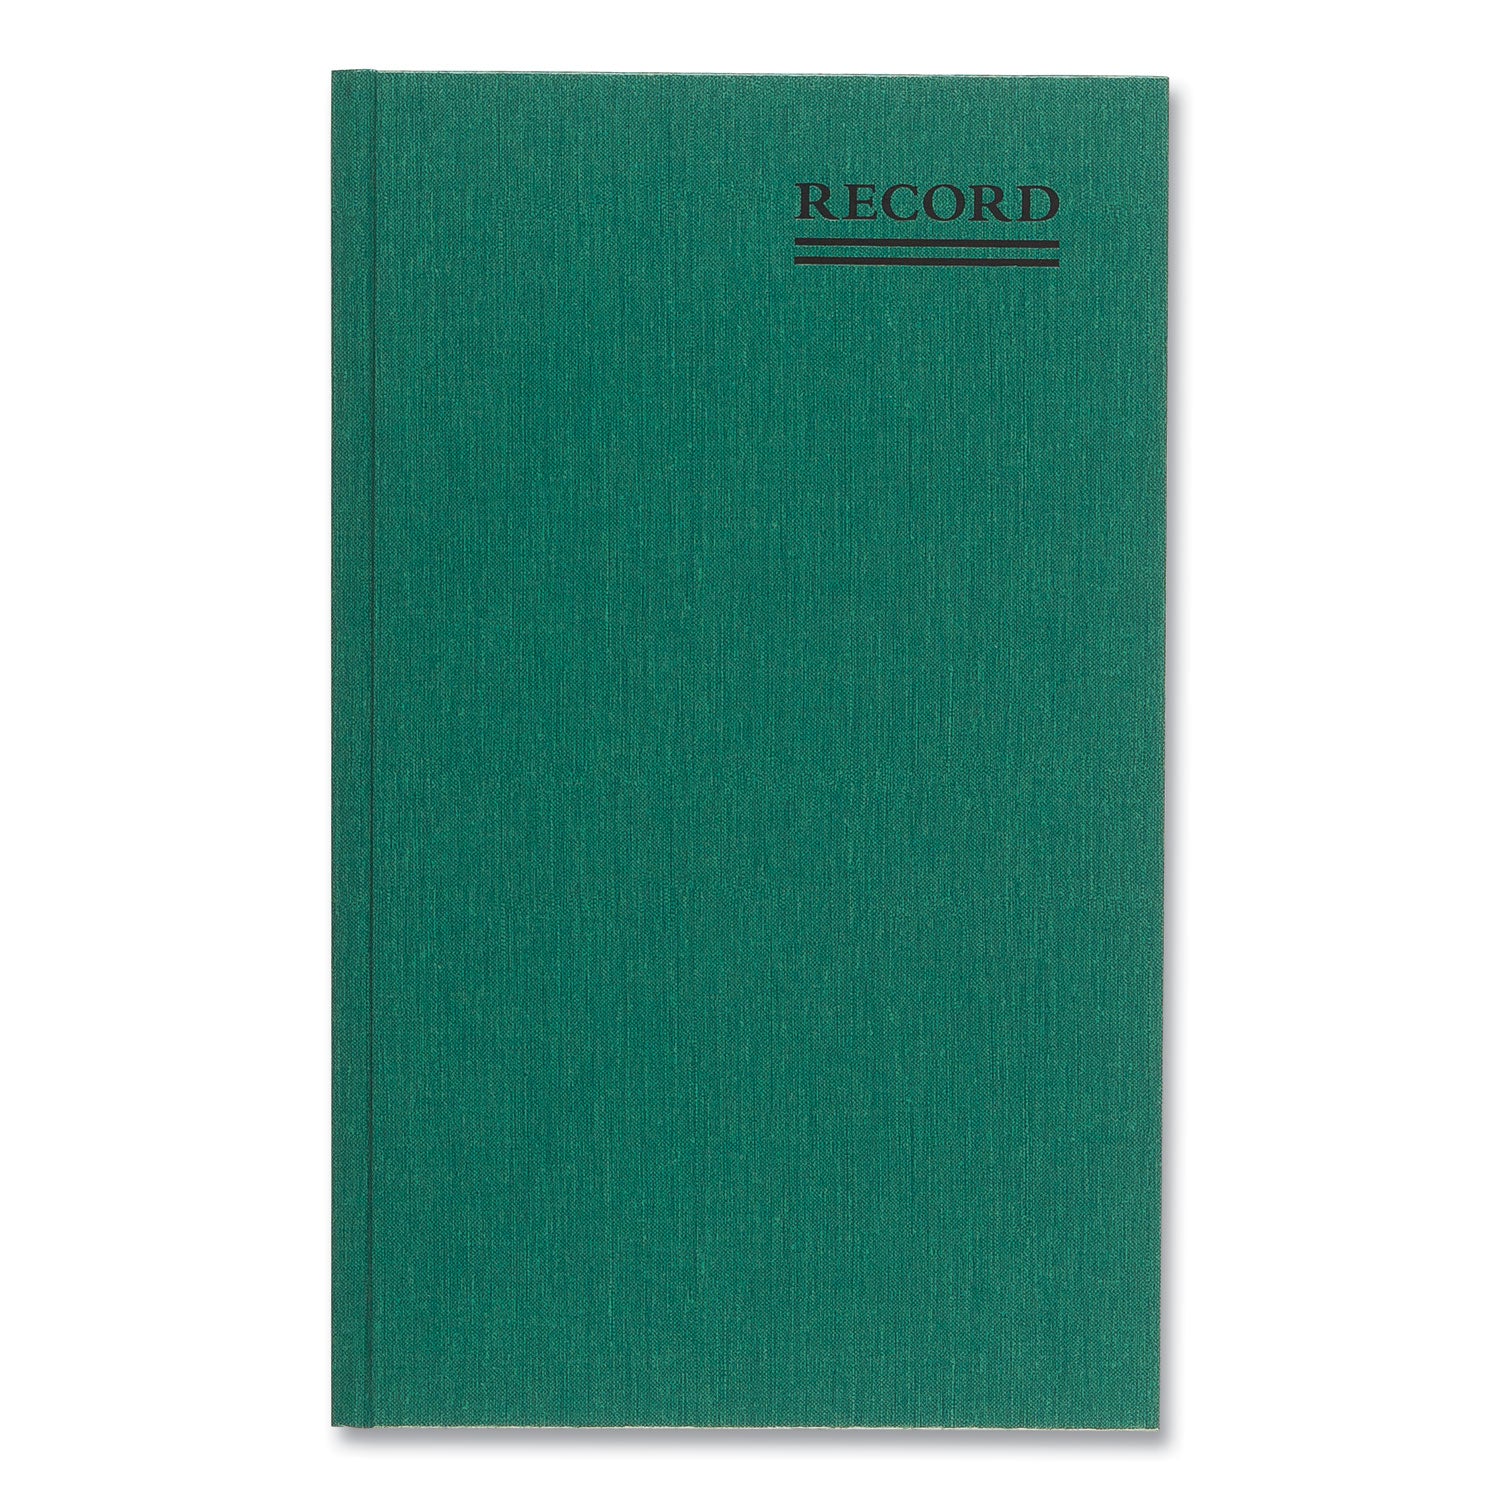 Emerald Series Account Book, Green Cover, 12.25 x 7.25 Sheets, 150 Sheets/Book - 